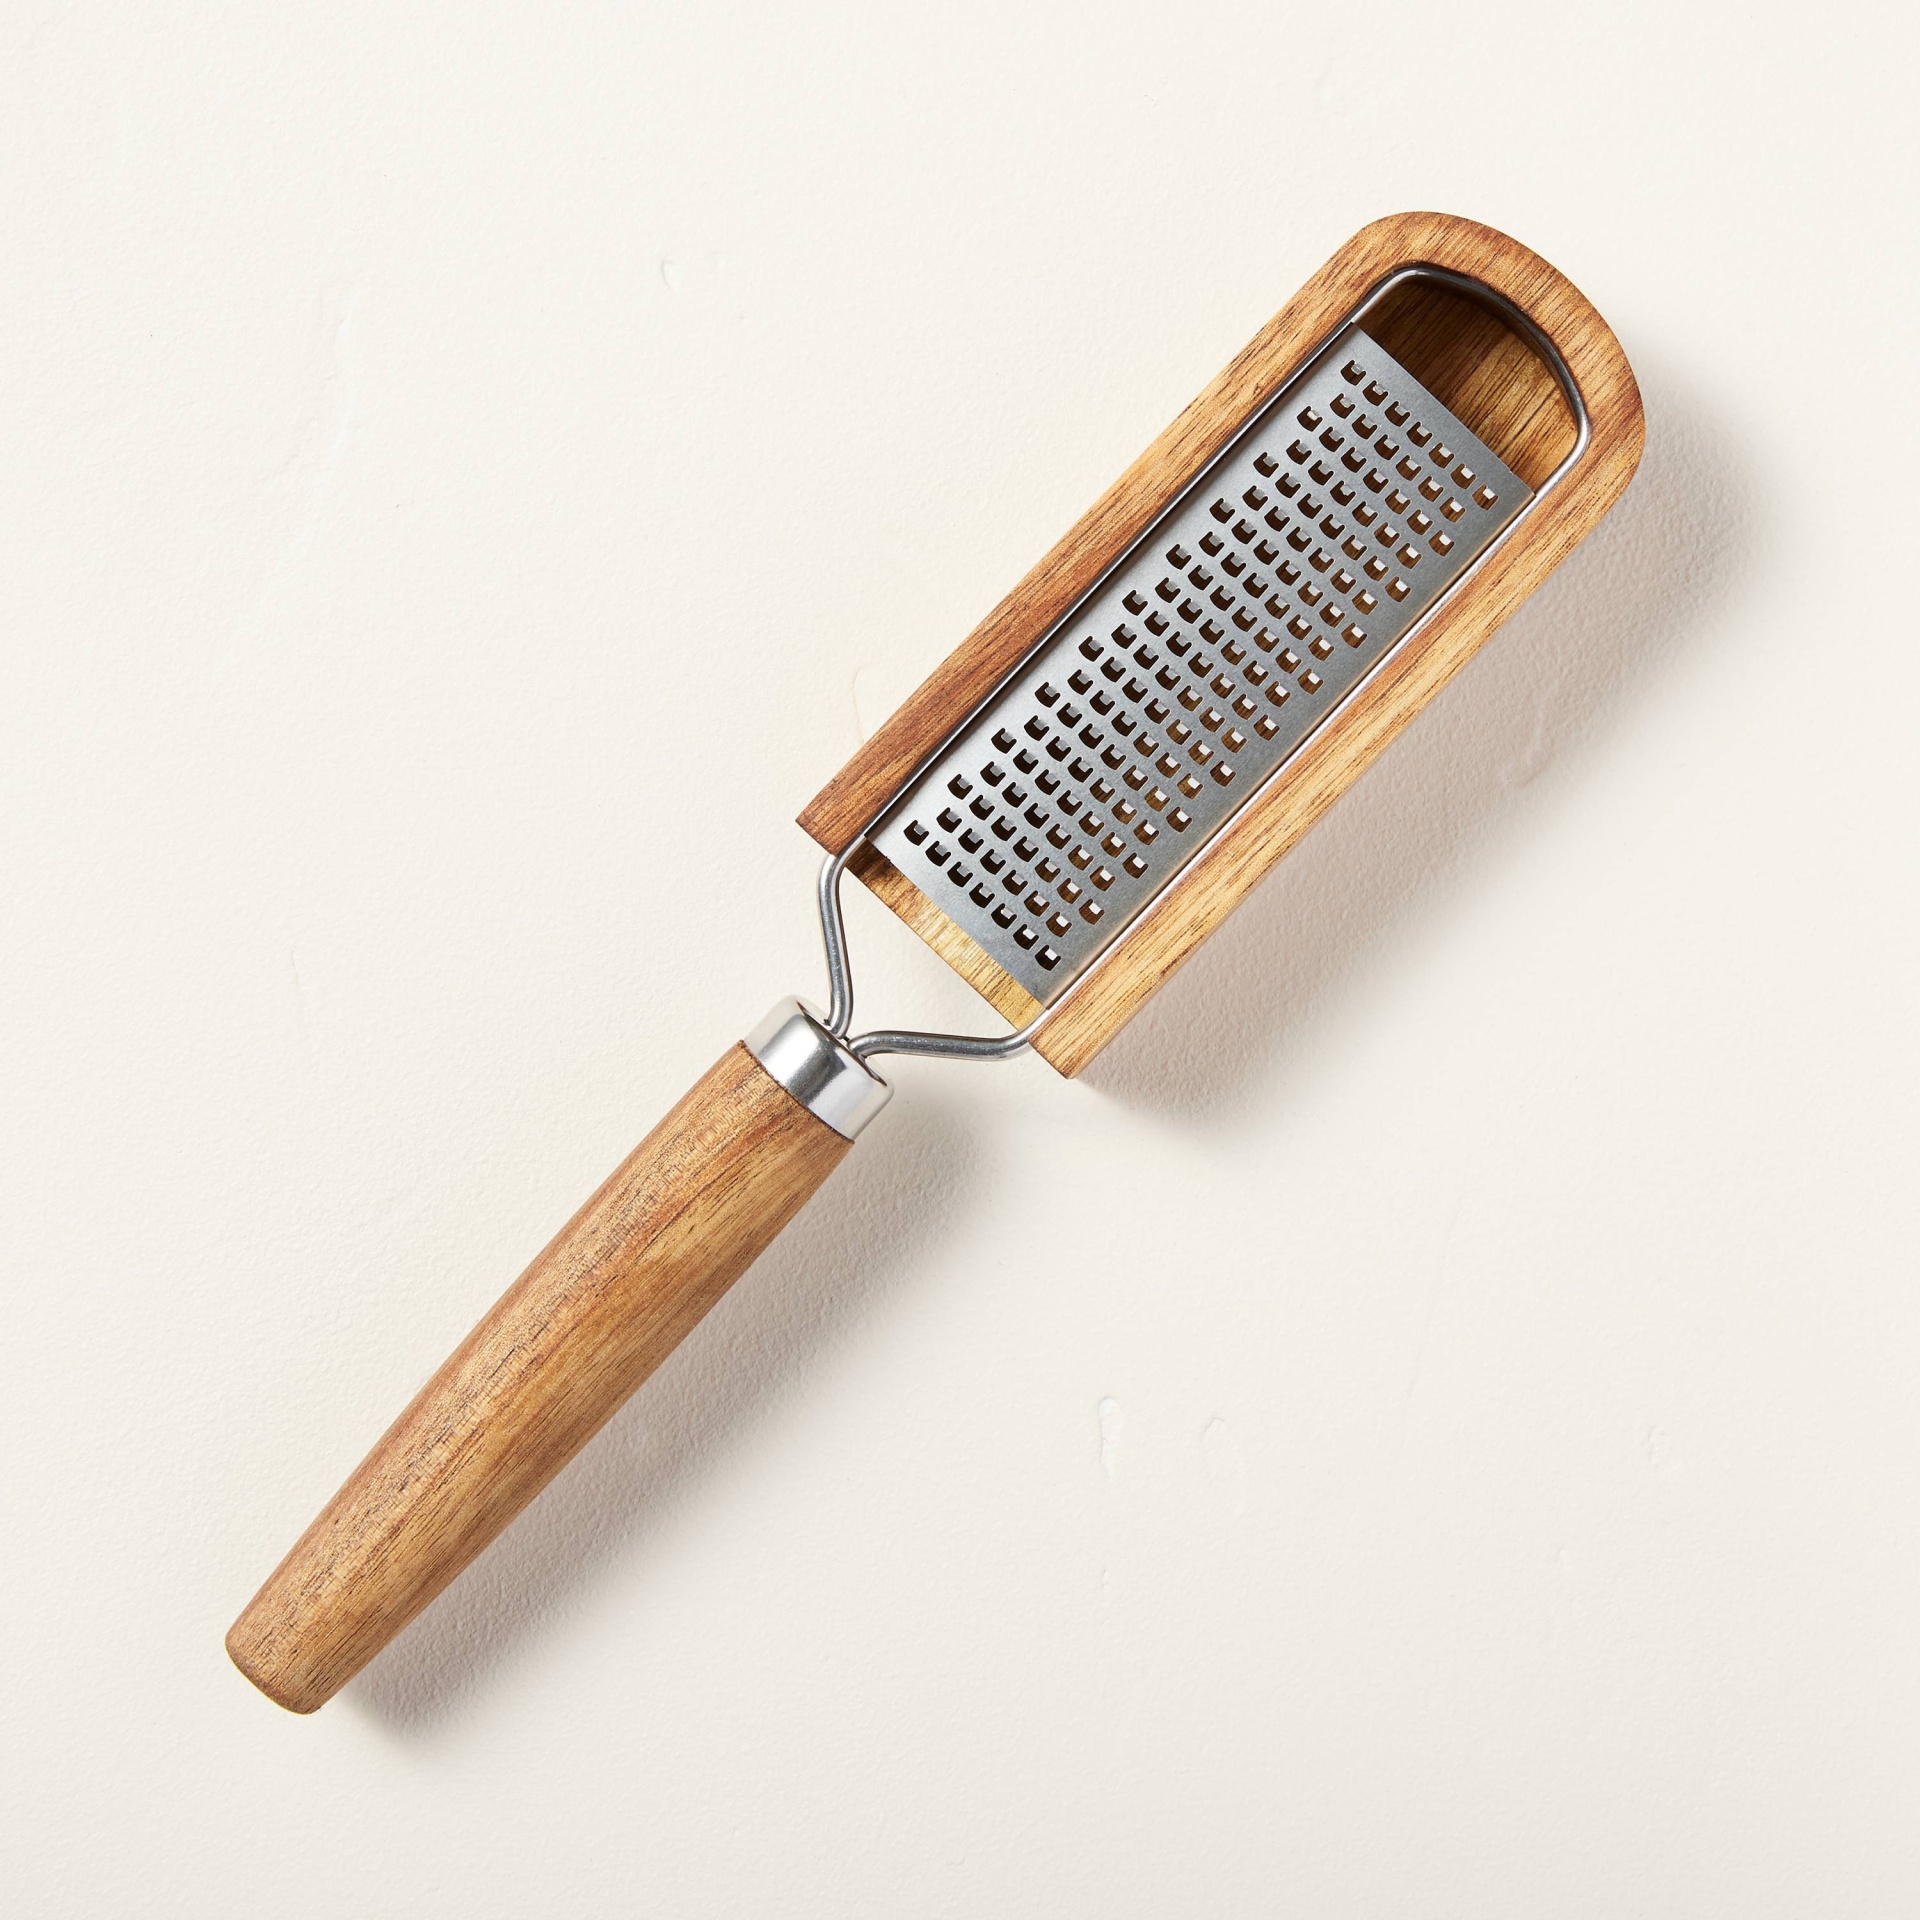 Wood Handle Grater with Catcher - Hearth & Hand with Magnolia 1 ct